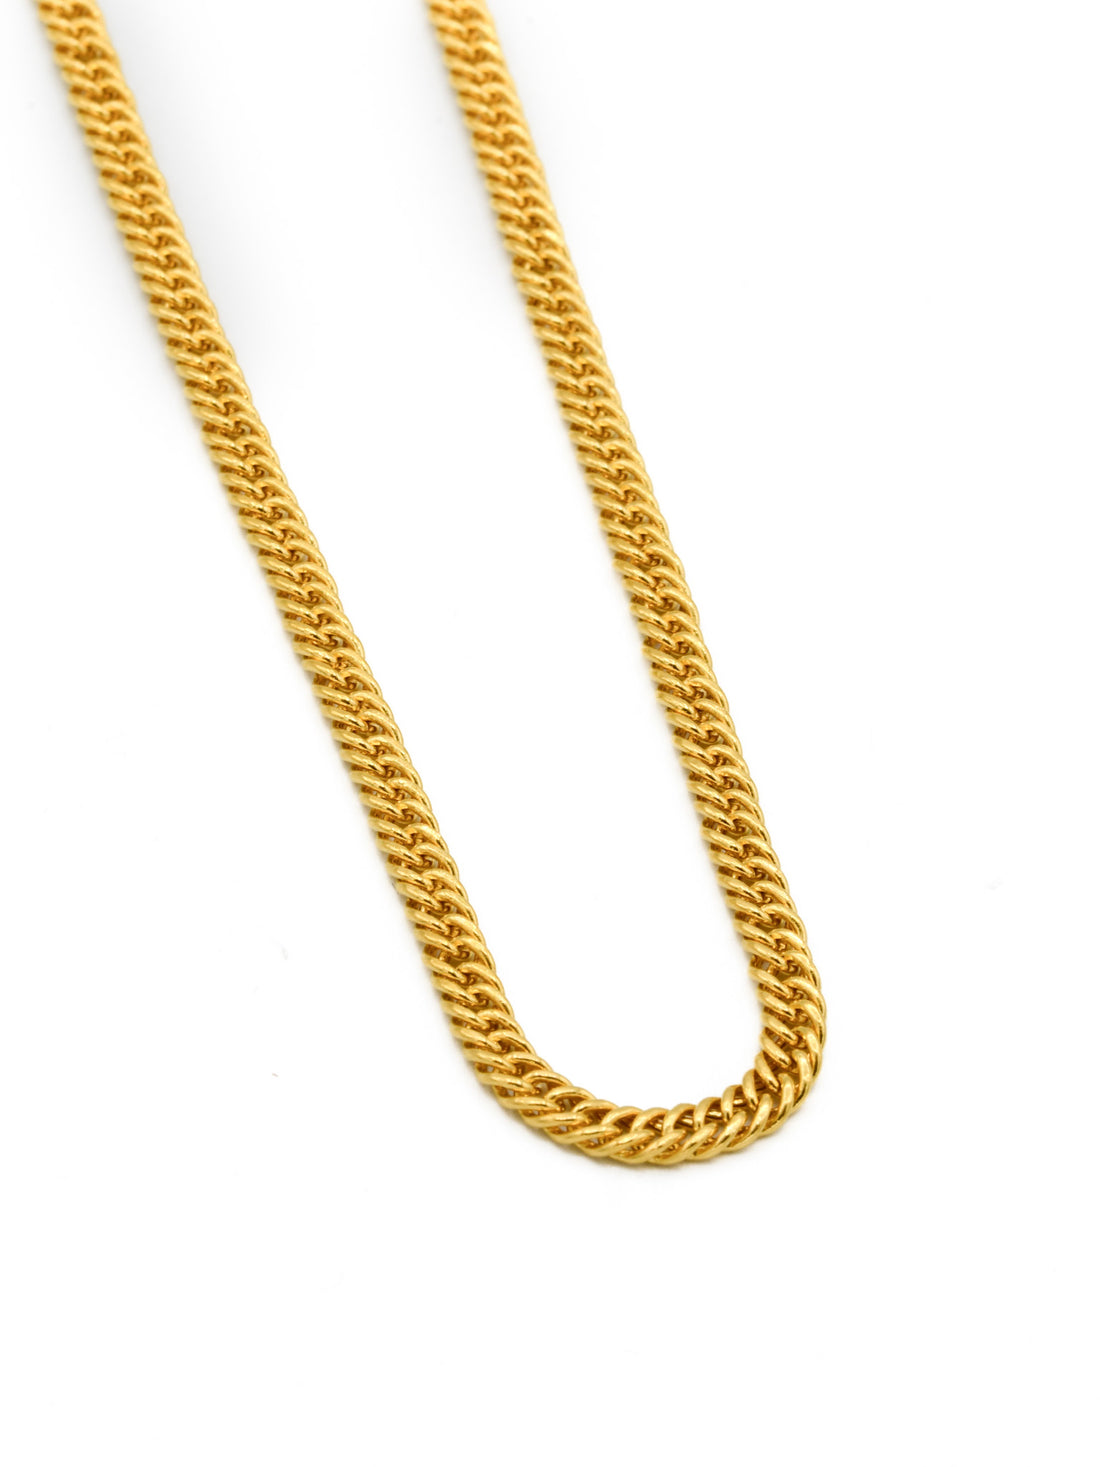 22ct Gold Hollow Chain - Roop Darshan